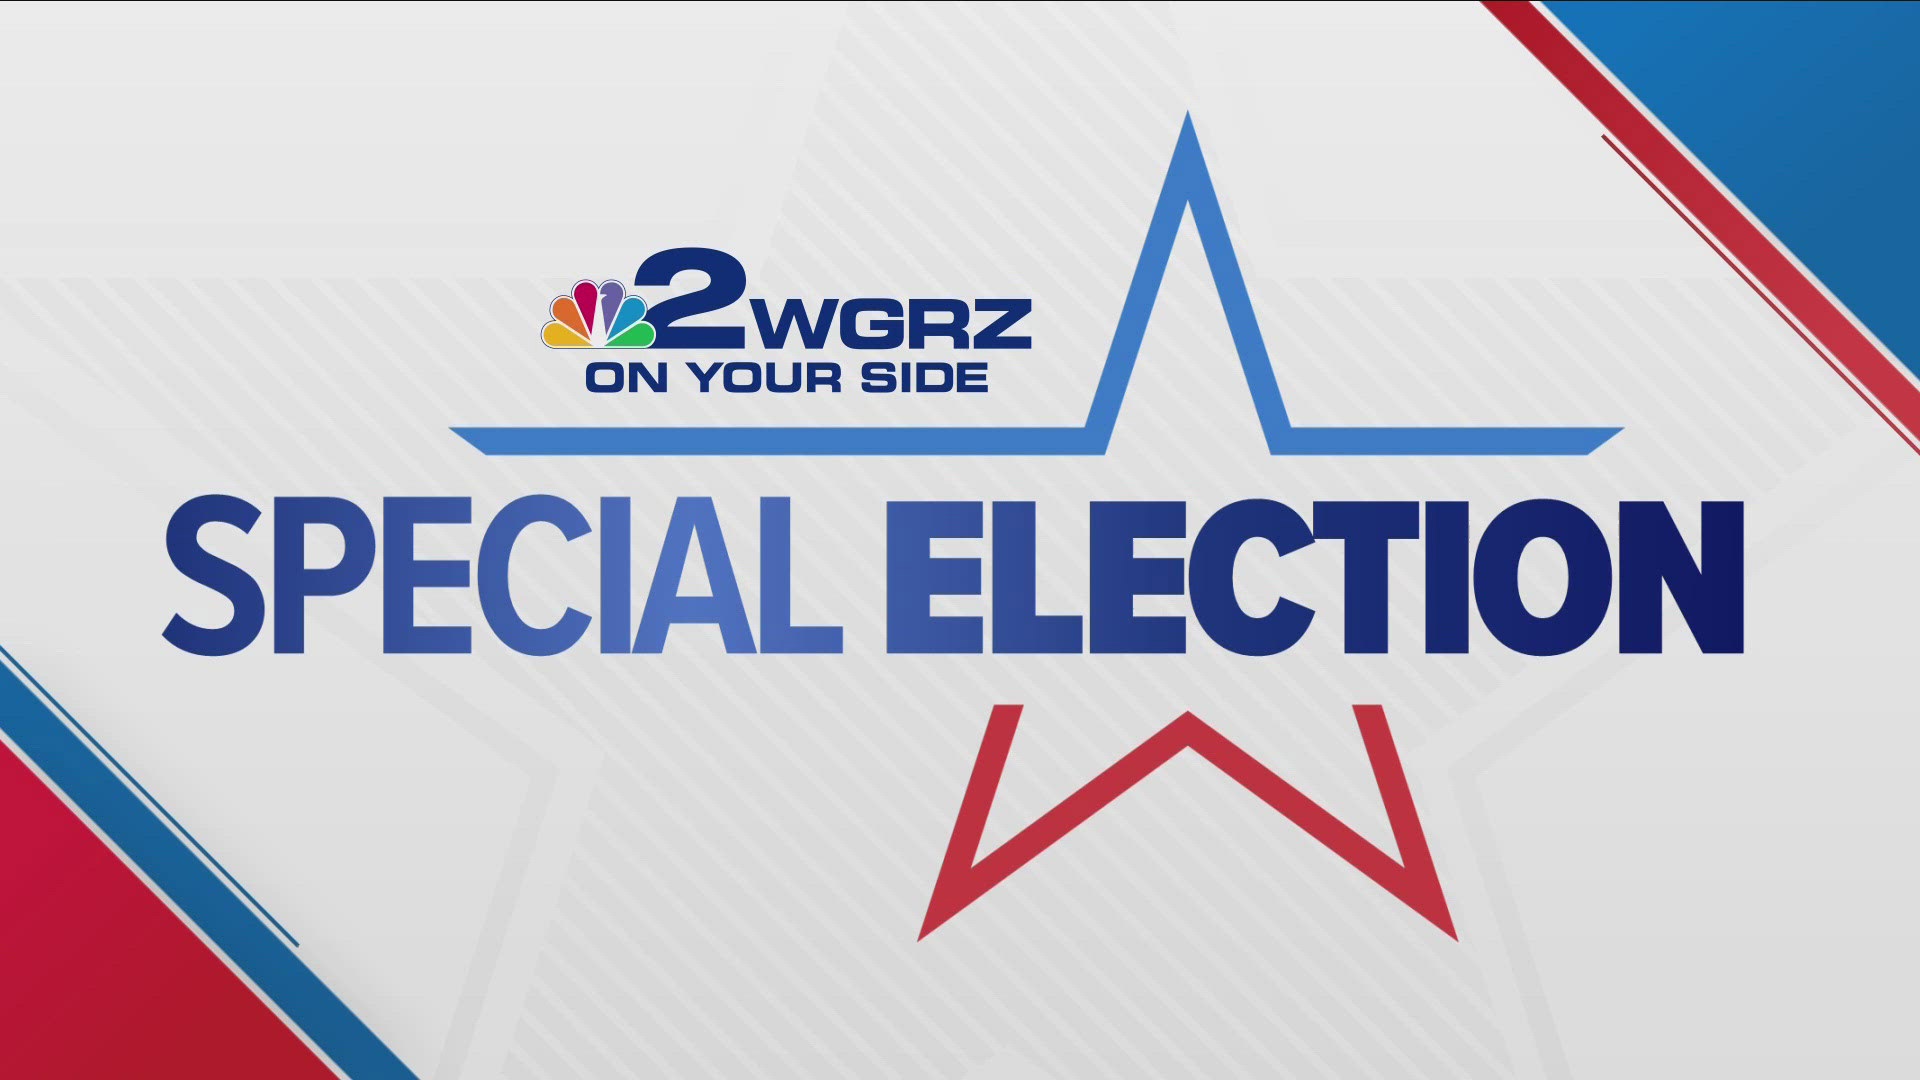 Special Election happening on Tuesday, April 30 for 26th Congressional Seat